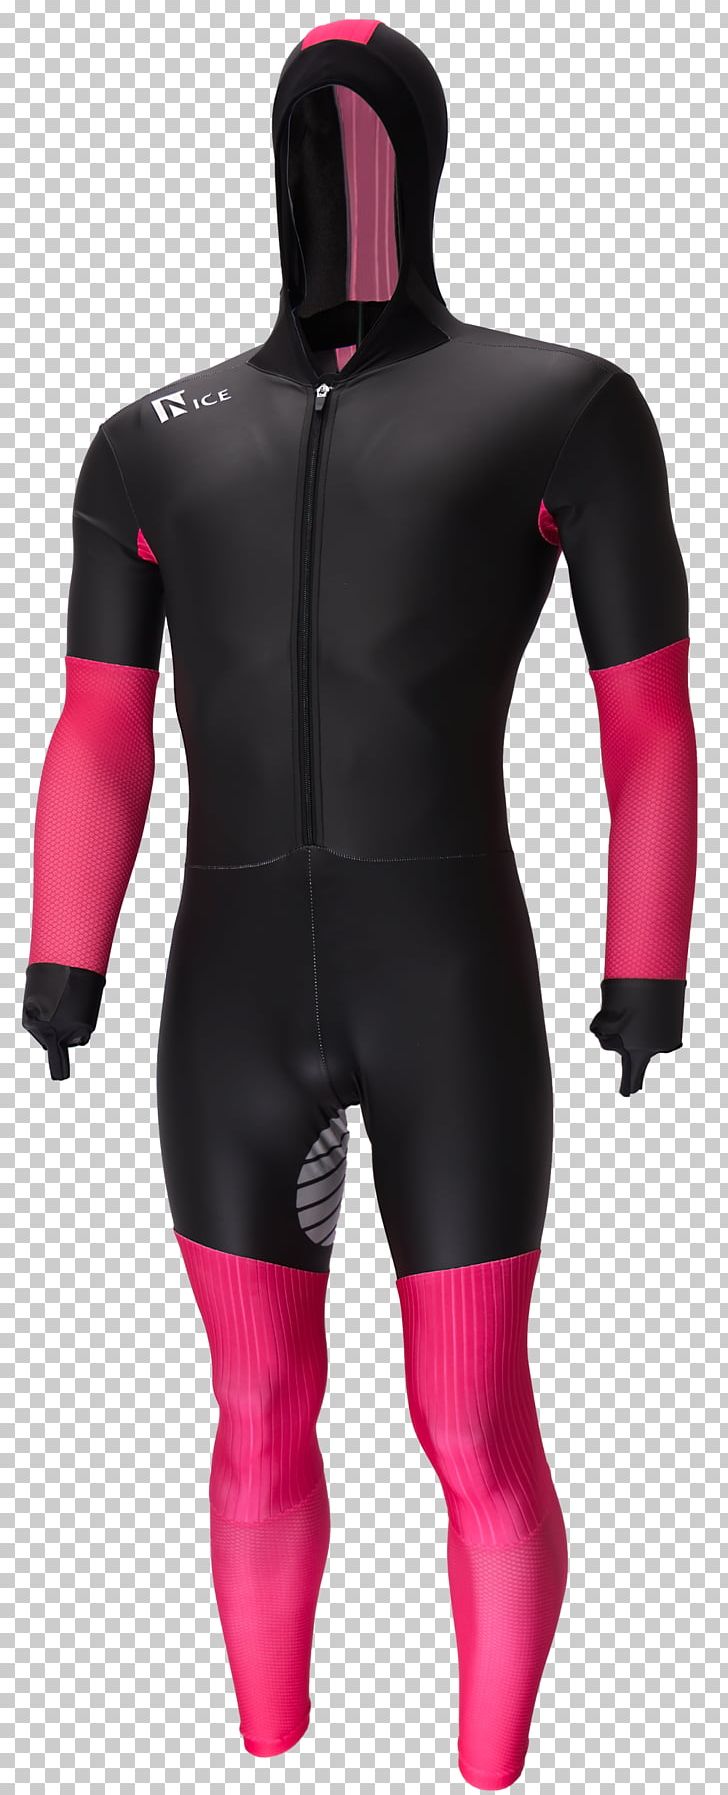 Schaatspak Spandex Sock Suit Clothing PNG, Clipart, Blue, Cap, Clothing, Clothing Accessories, Dry Suit Free PNG Download